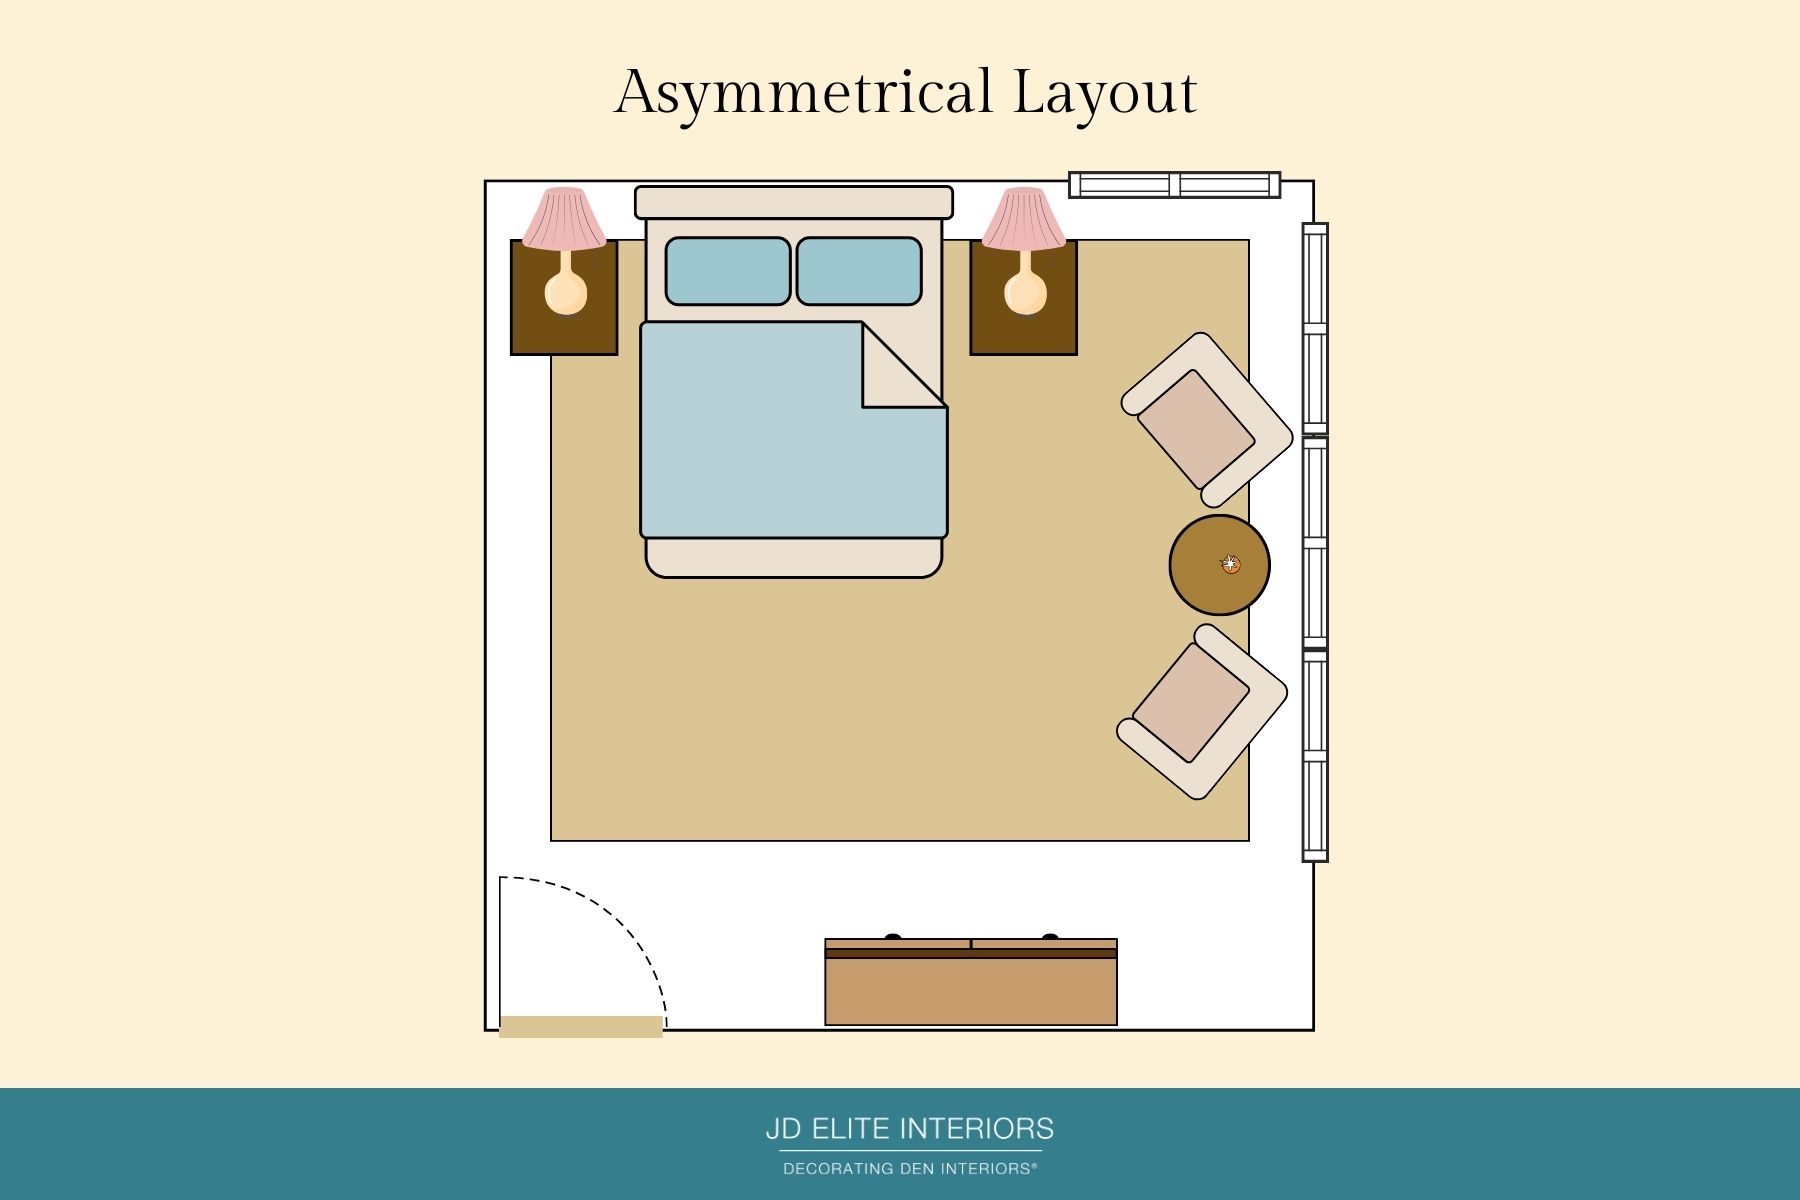 Asymmetrical design layout for a bedroom with a bed off-centered and a sitting area by the windows